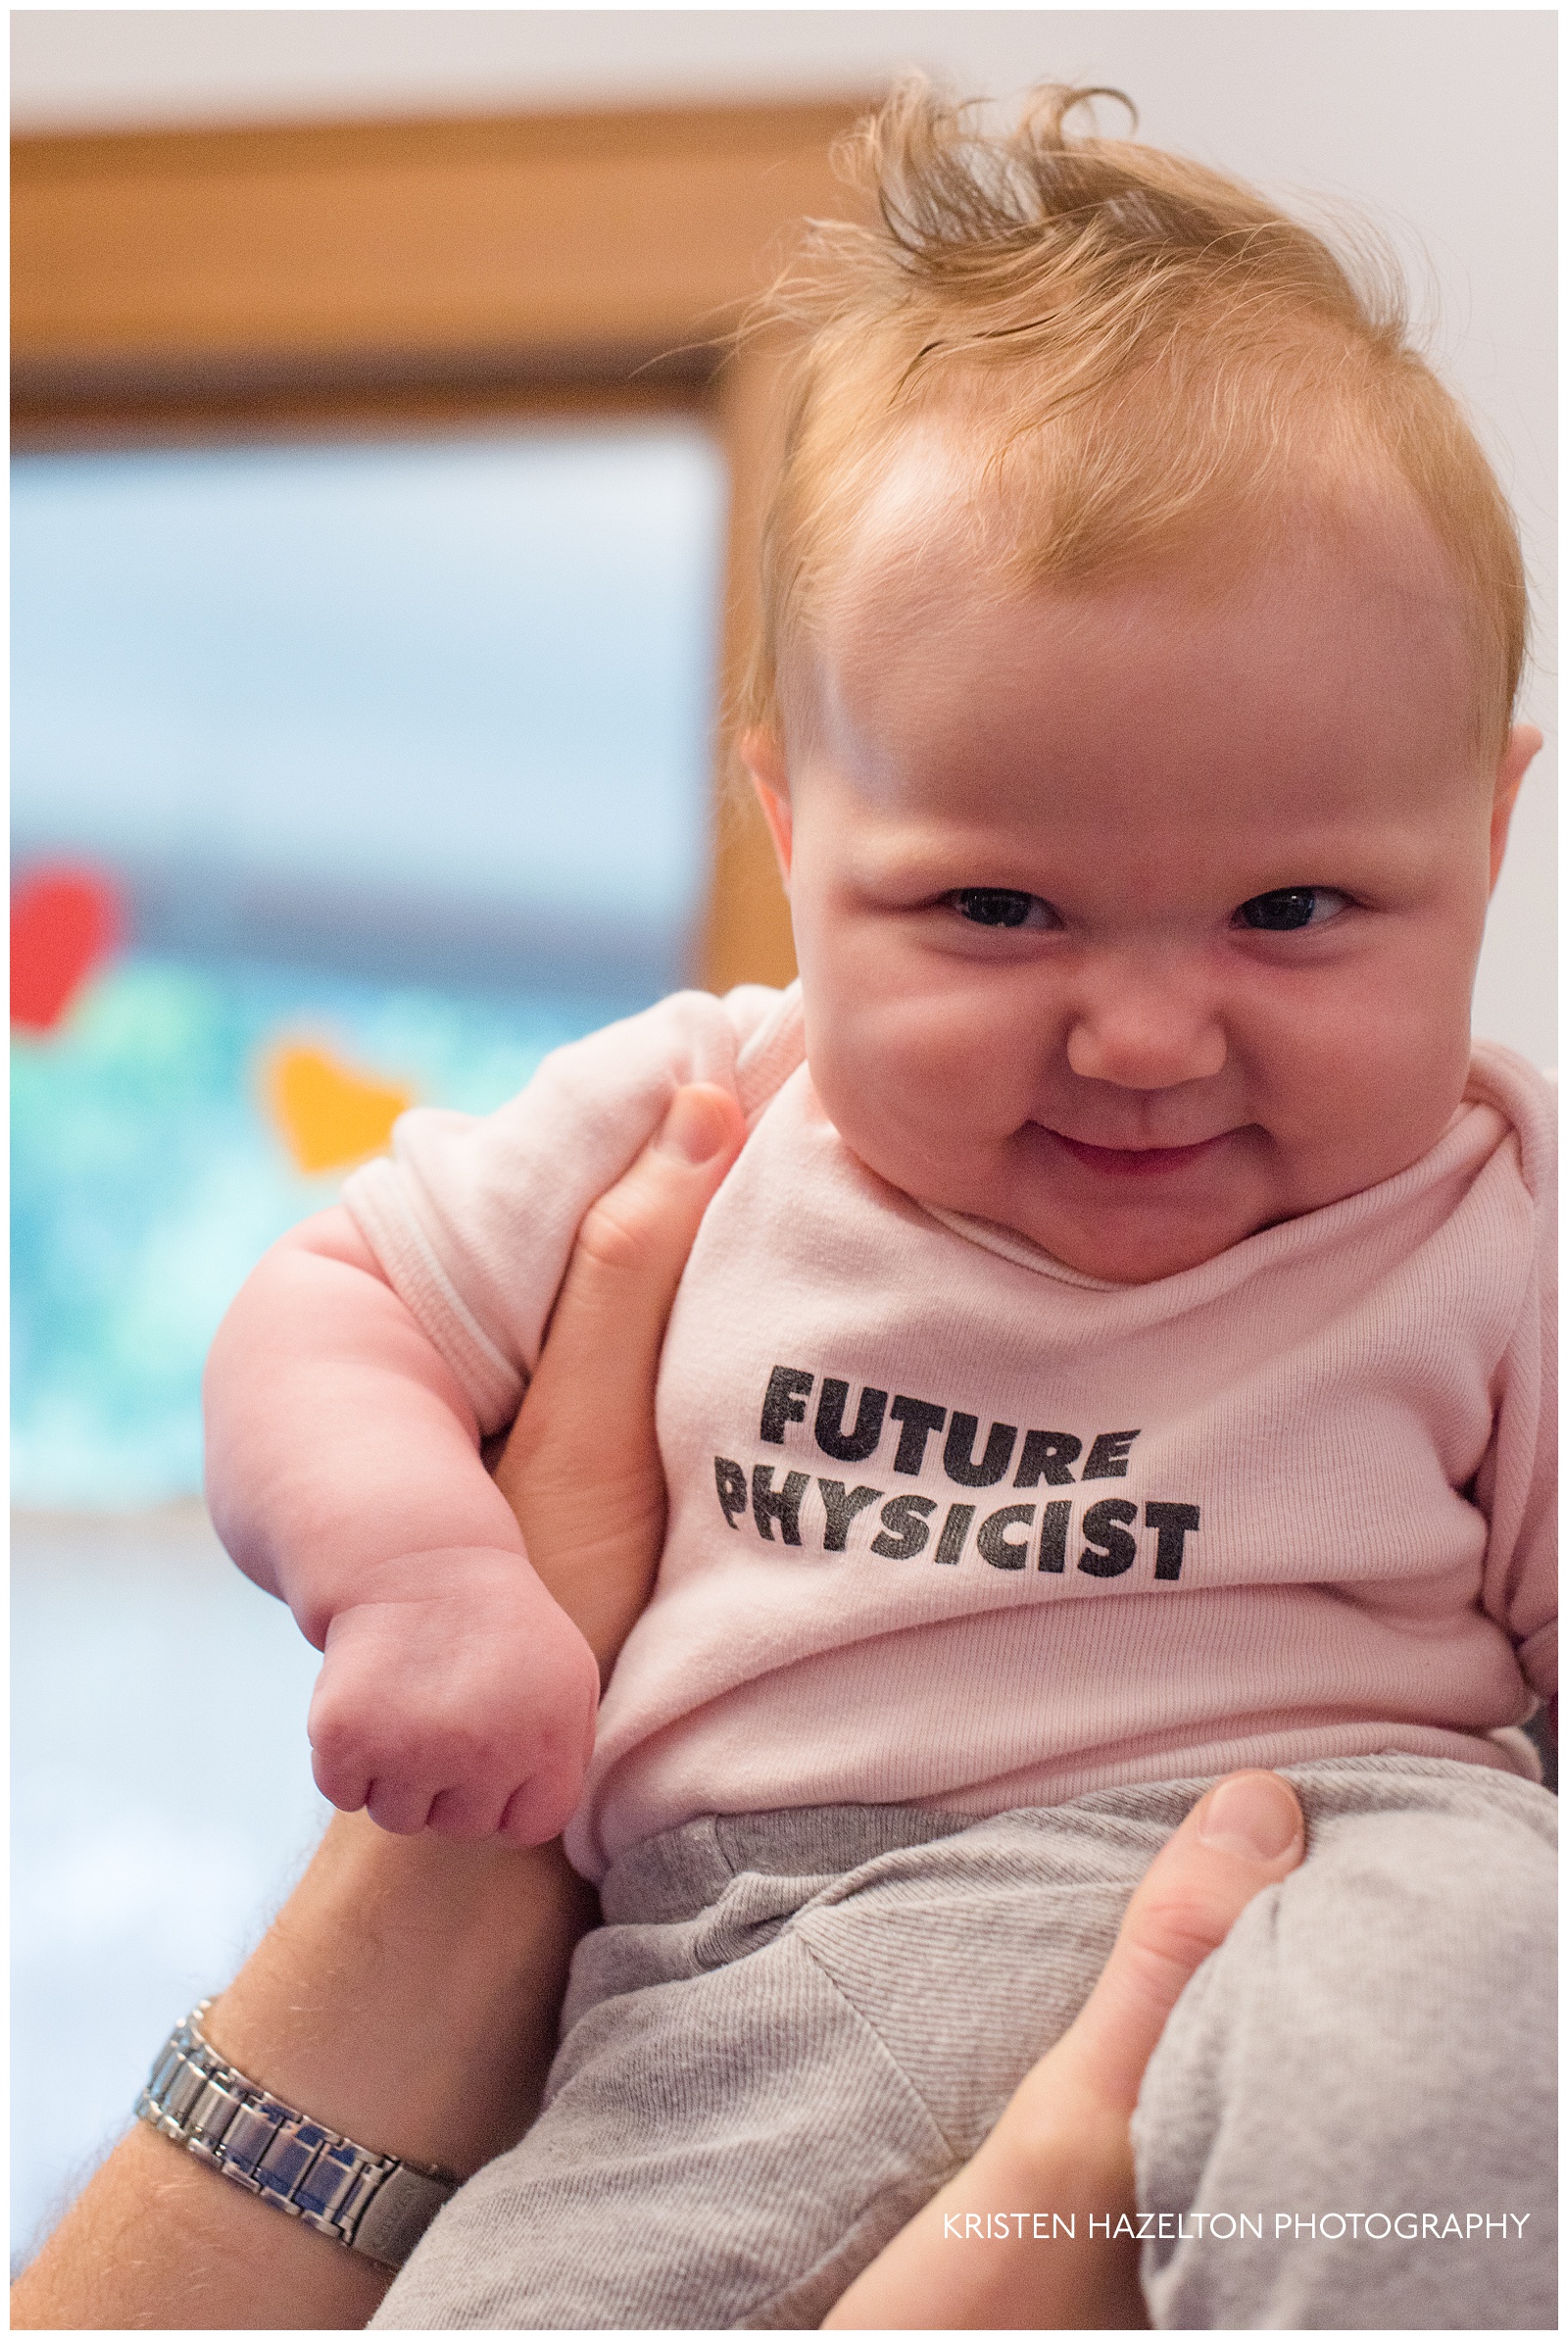 Smiling three-month old baby wearing onesie that says "Future Physicist"